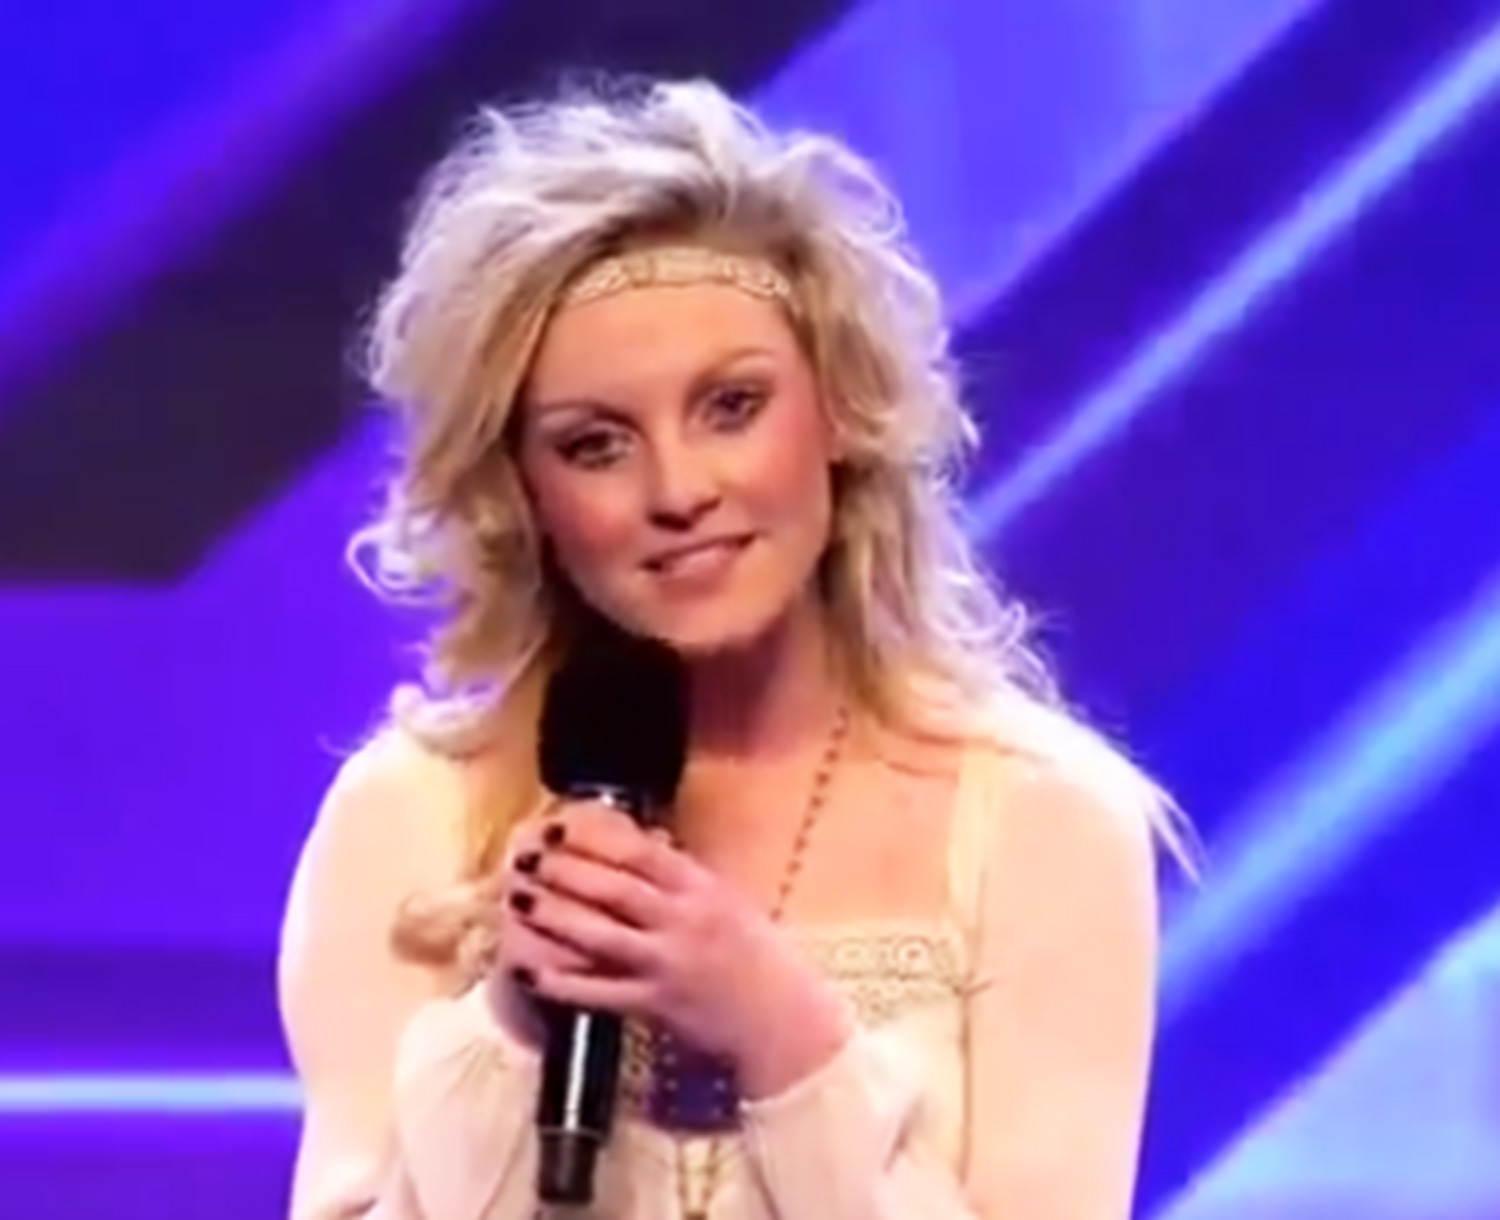  Perrie shot to fame on The X Factor on 2011